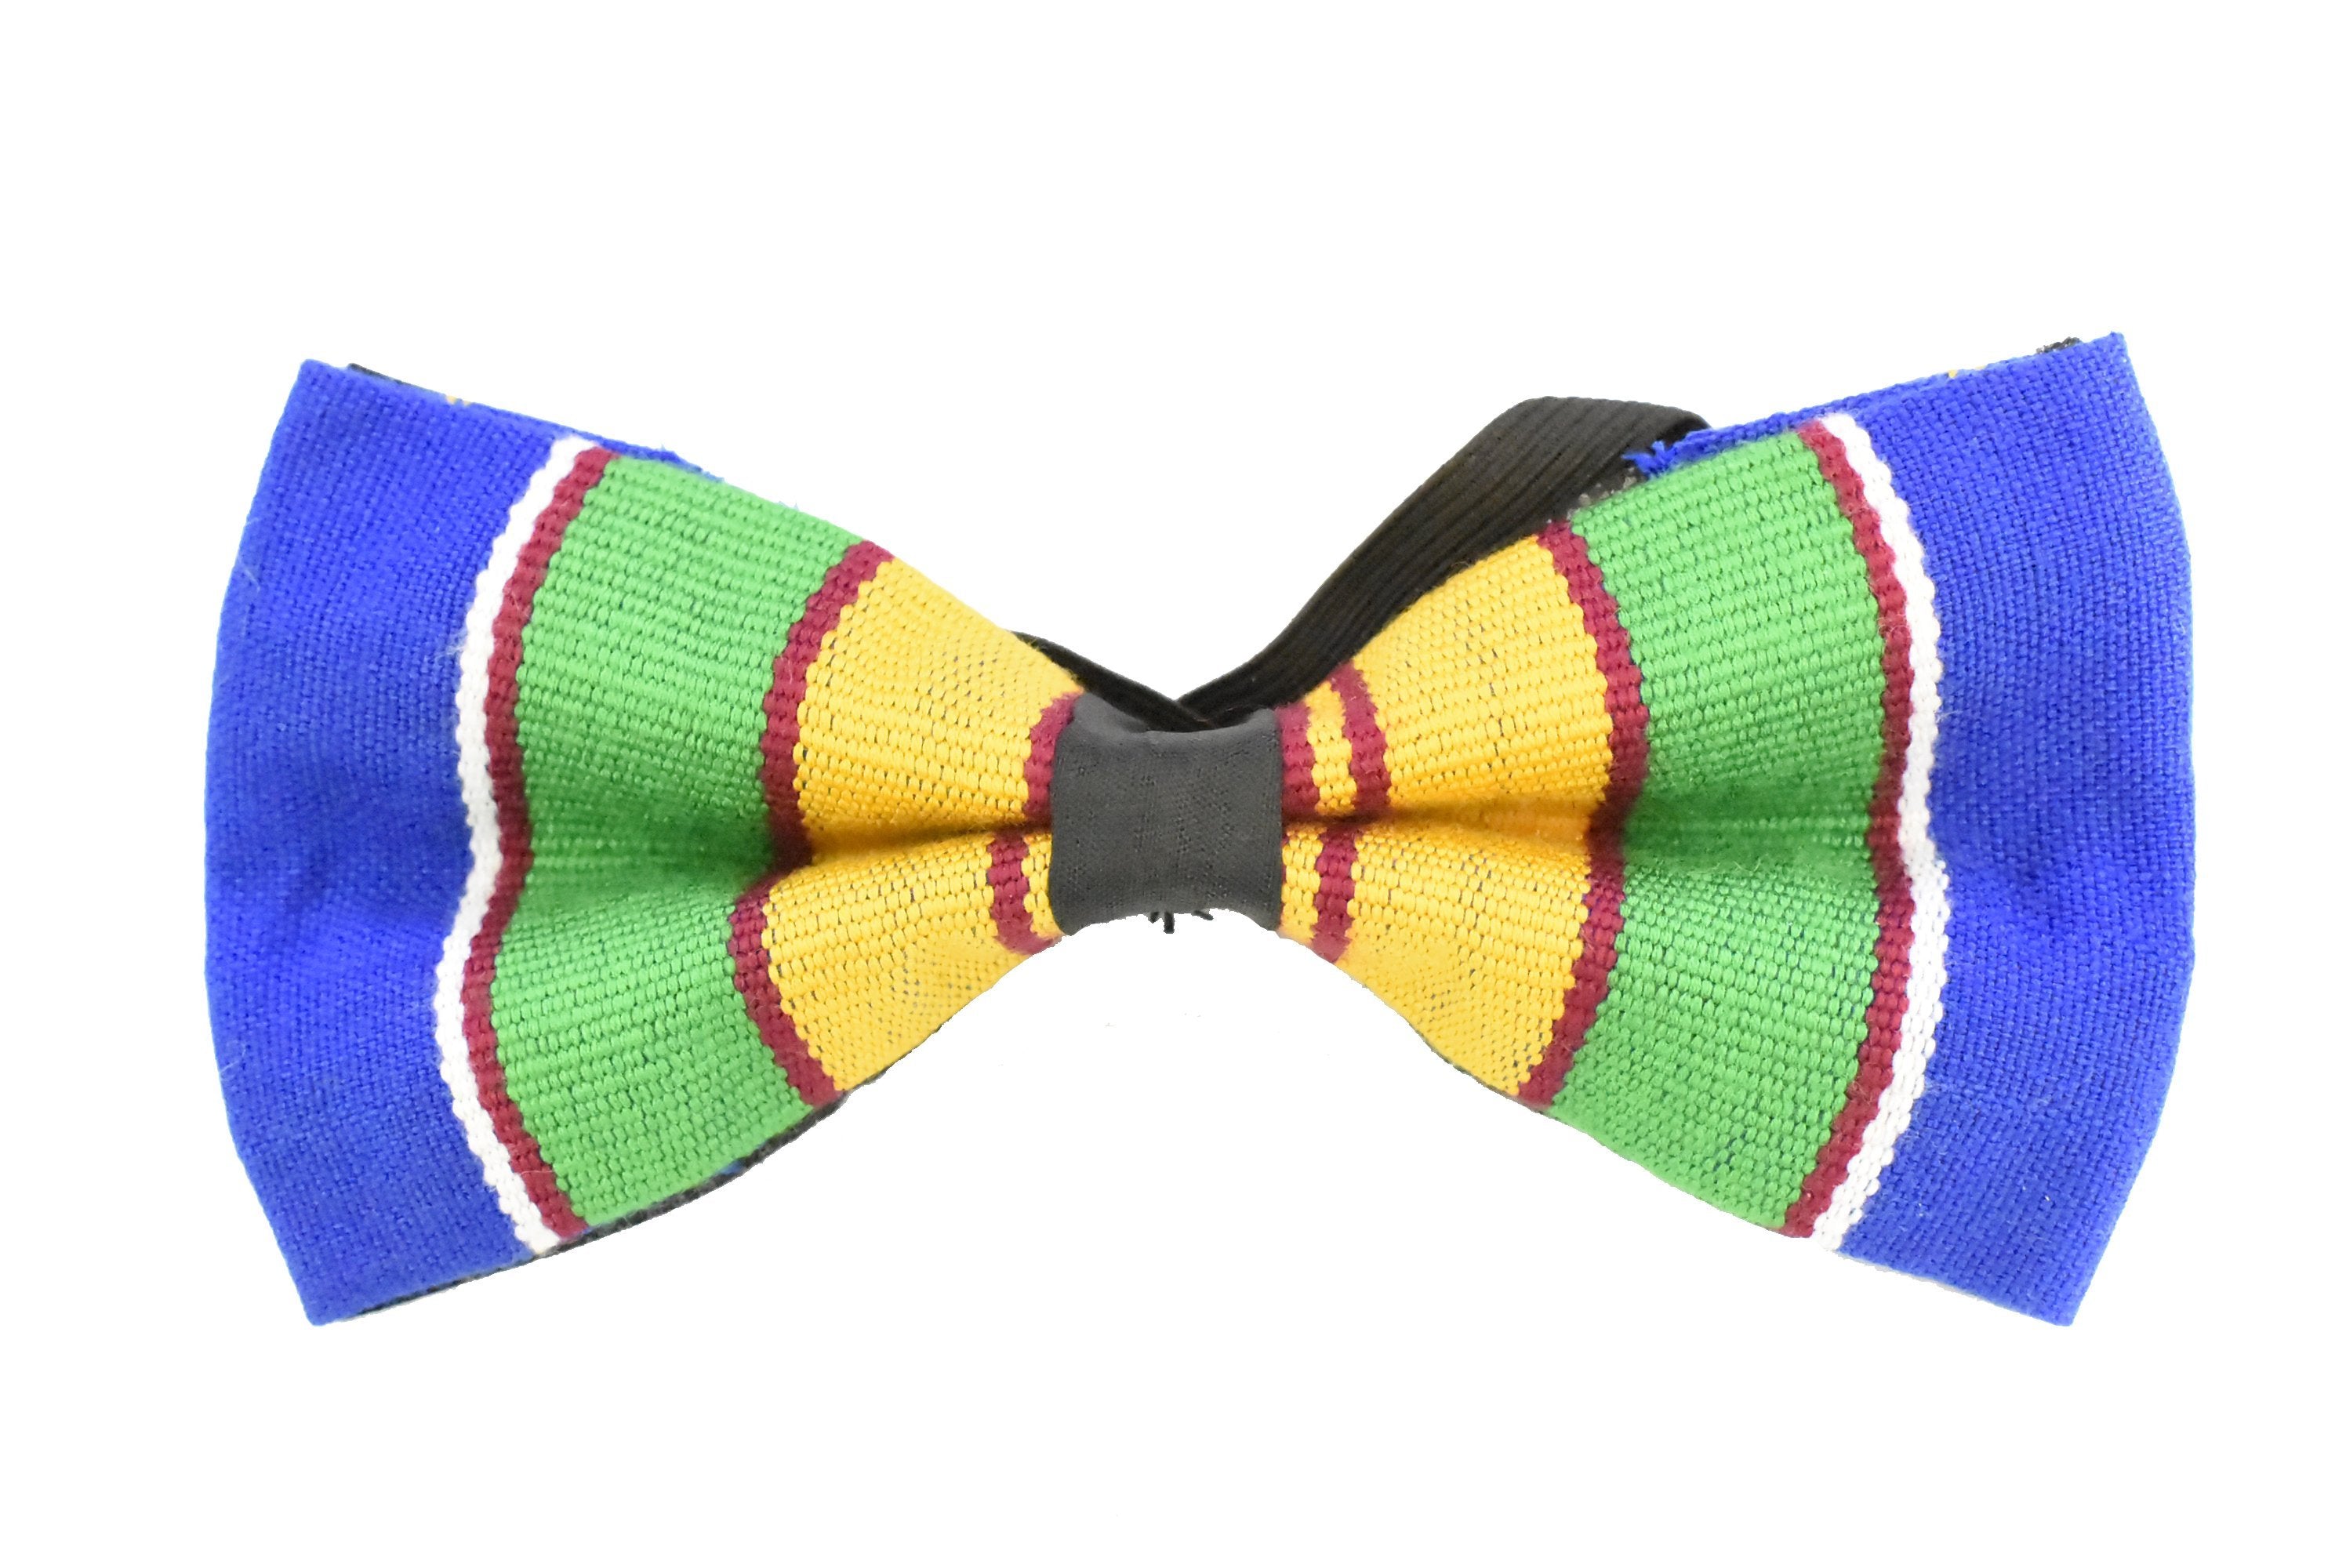 Handwoven Kente Cloth Bowtie - AFRIKAN ATTIRE - #african_clothing - ACCESSORIES